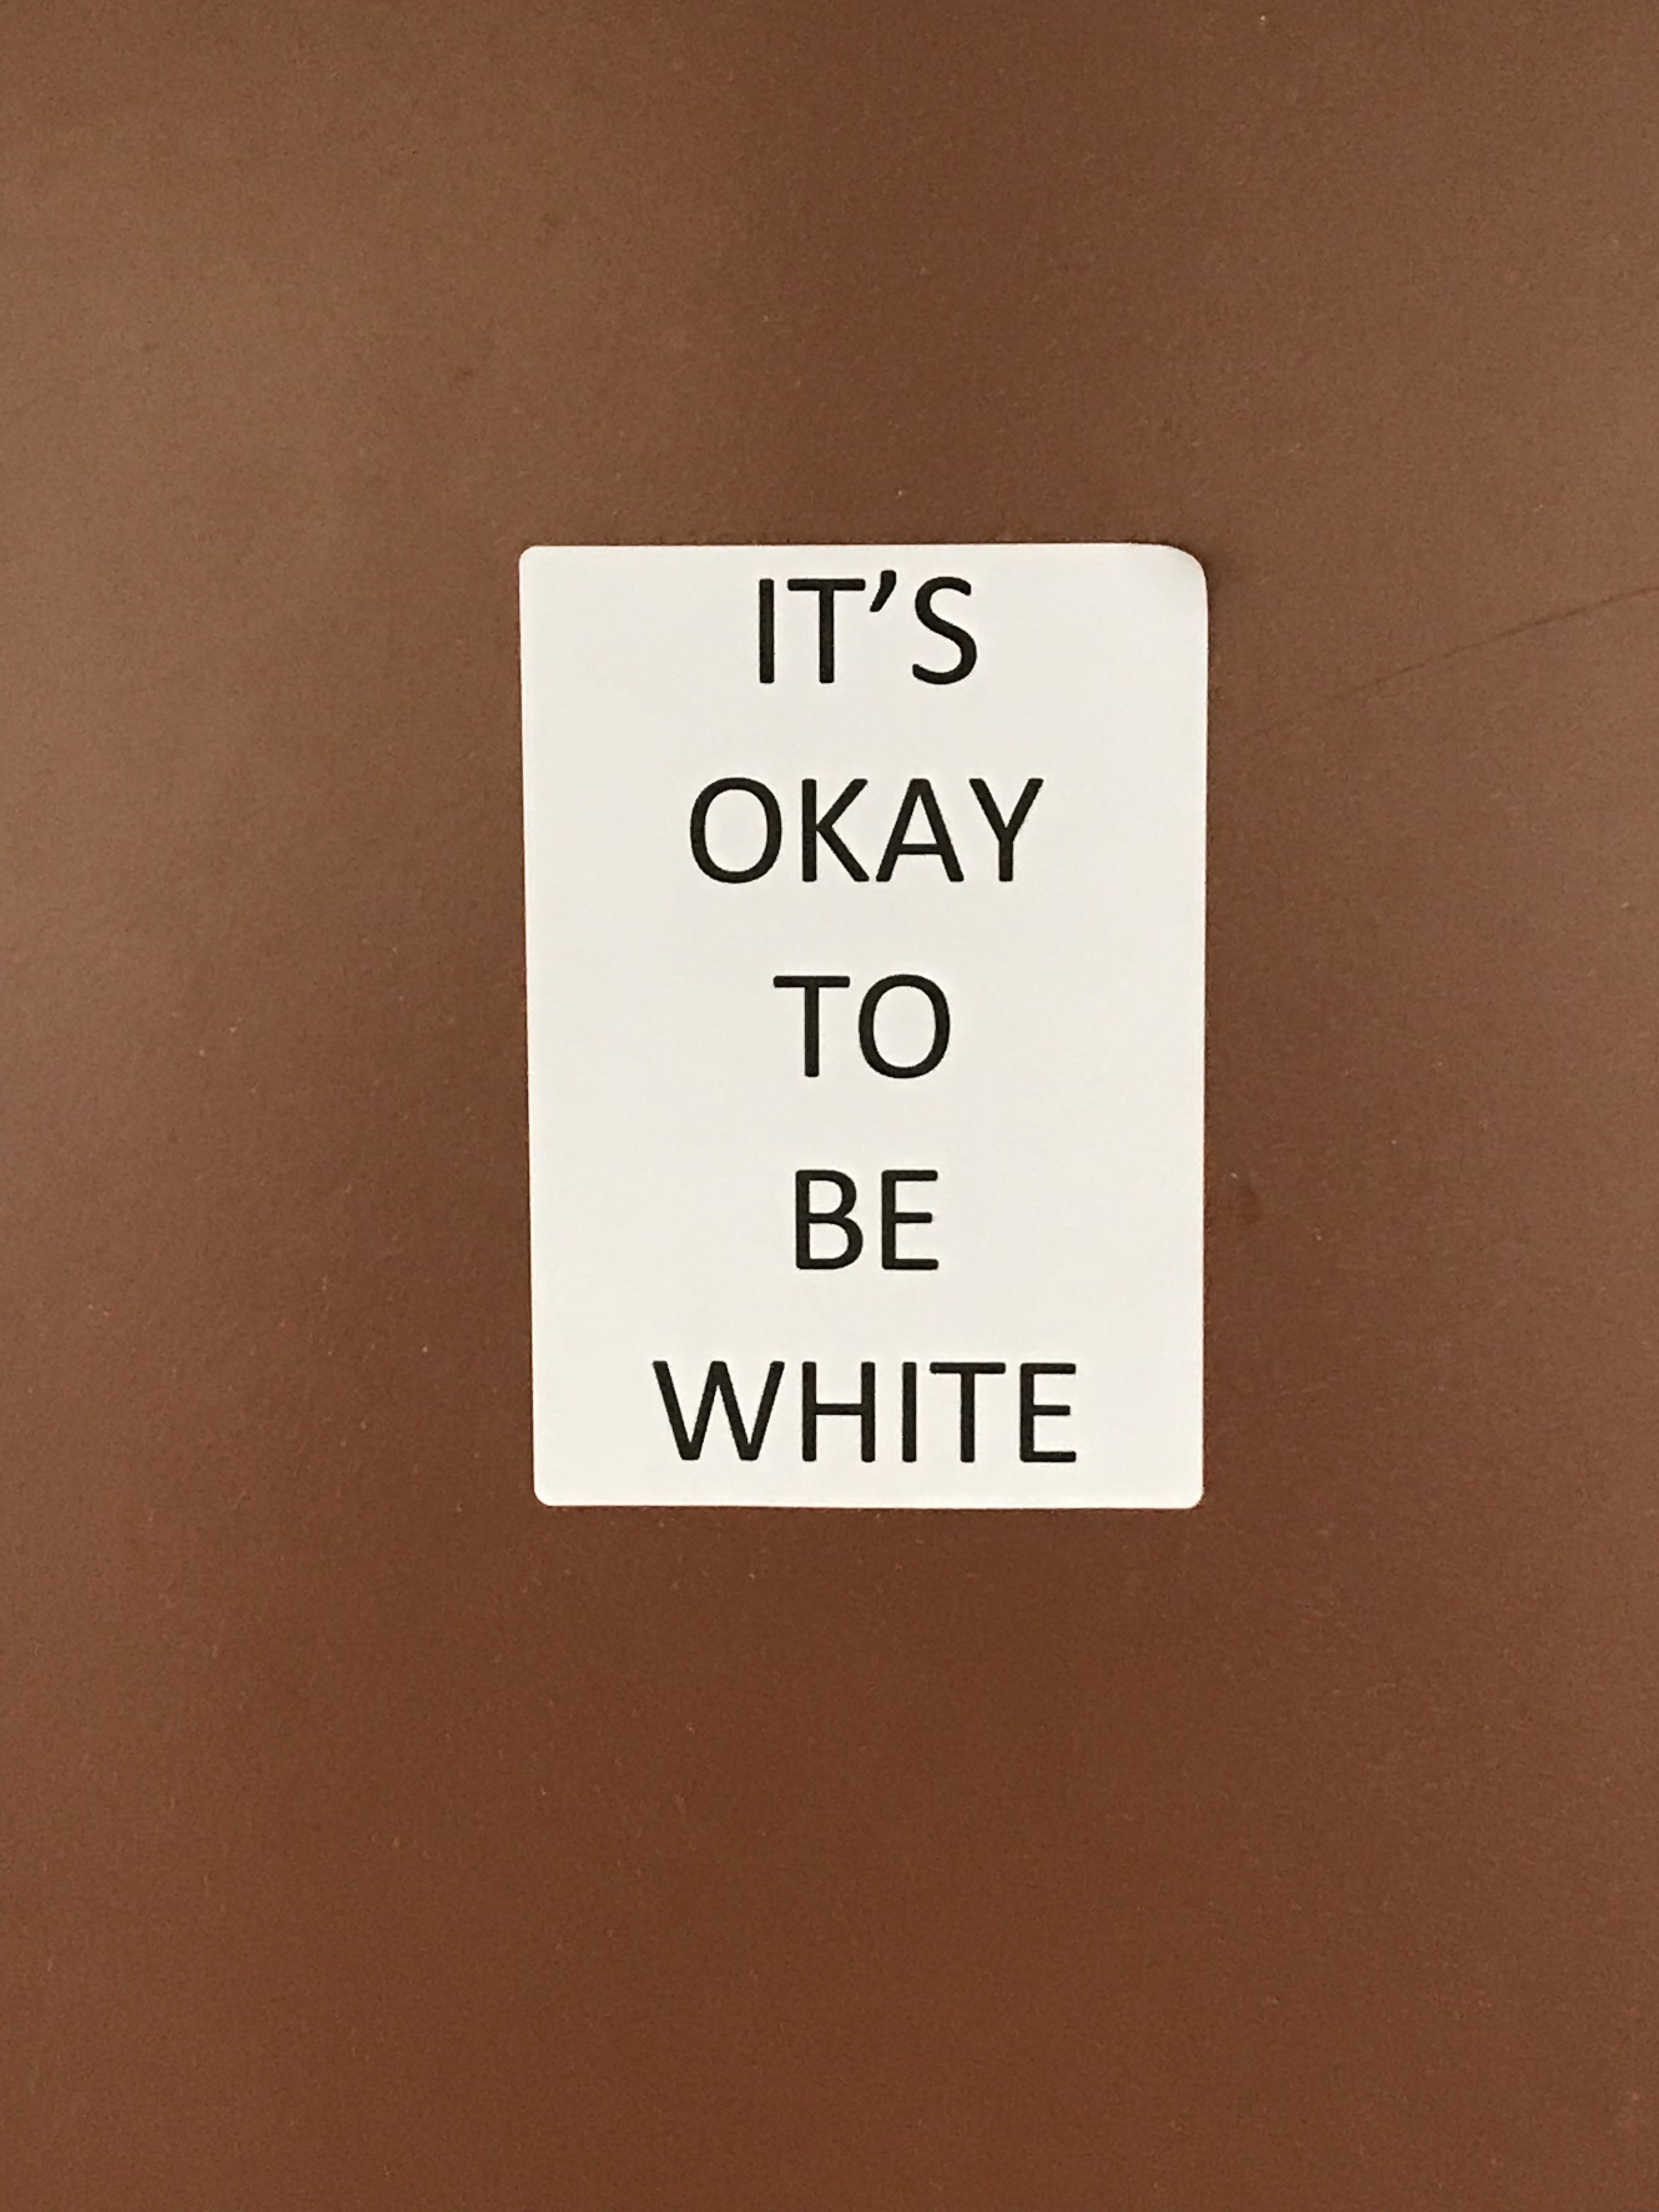 Thumbnail for “It’s OK to be white” stickers appear across the SPHS campus